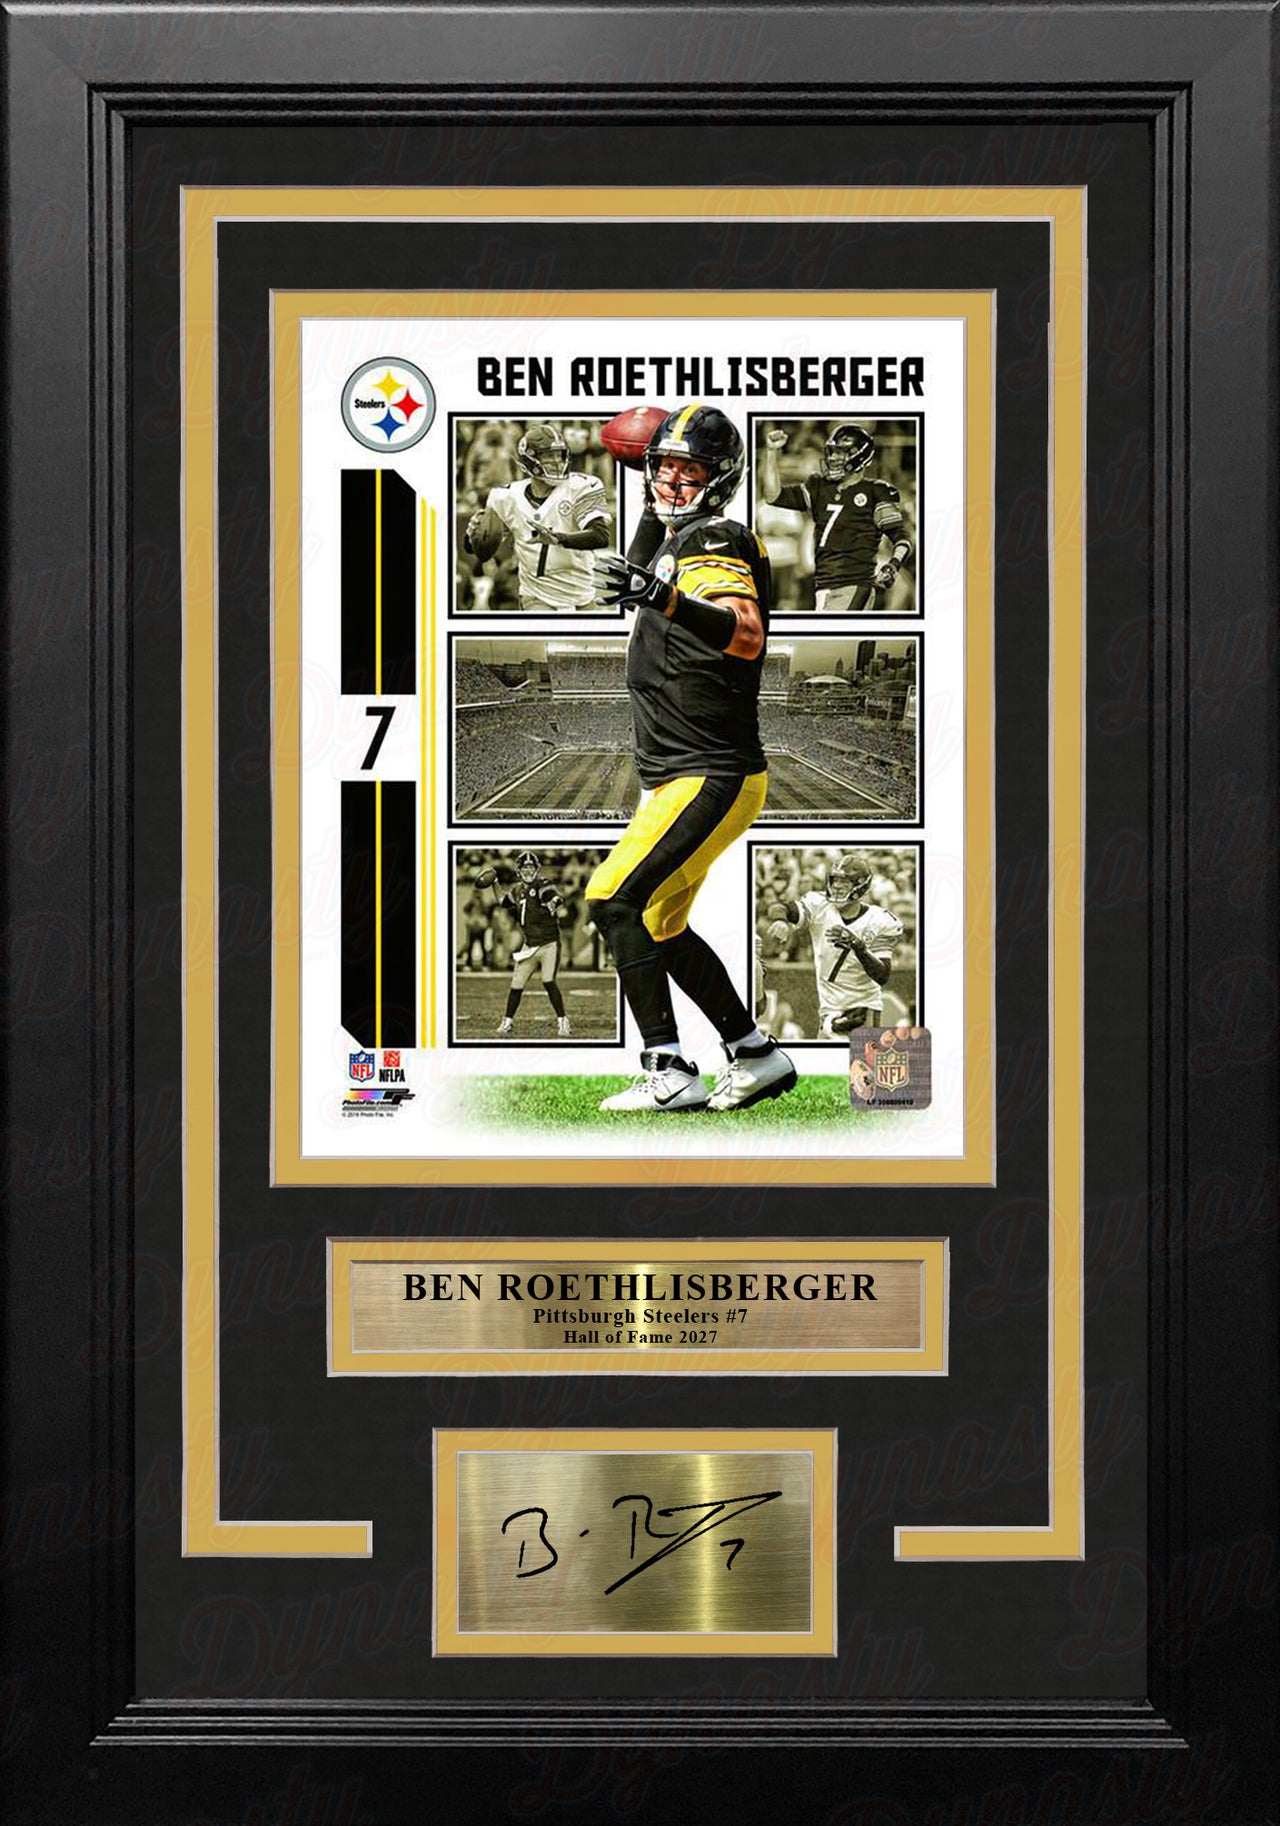 Ben Roethlisberger Pittsburgh Steelers 8x10 Framed Collage Football Photo with Engraved Autograph